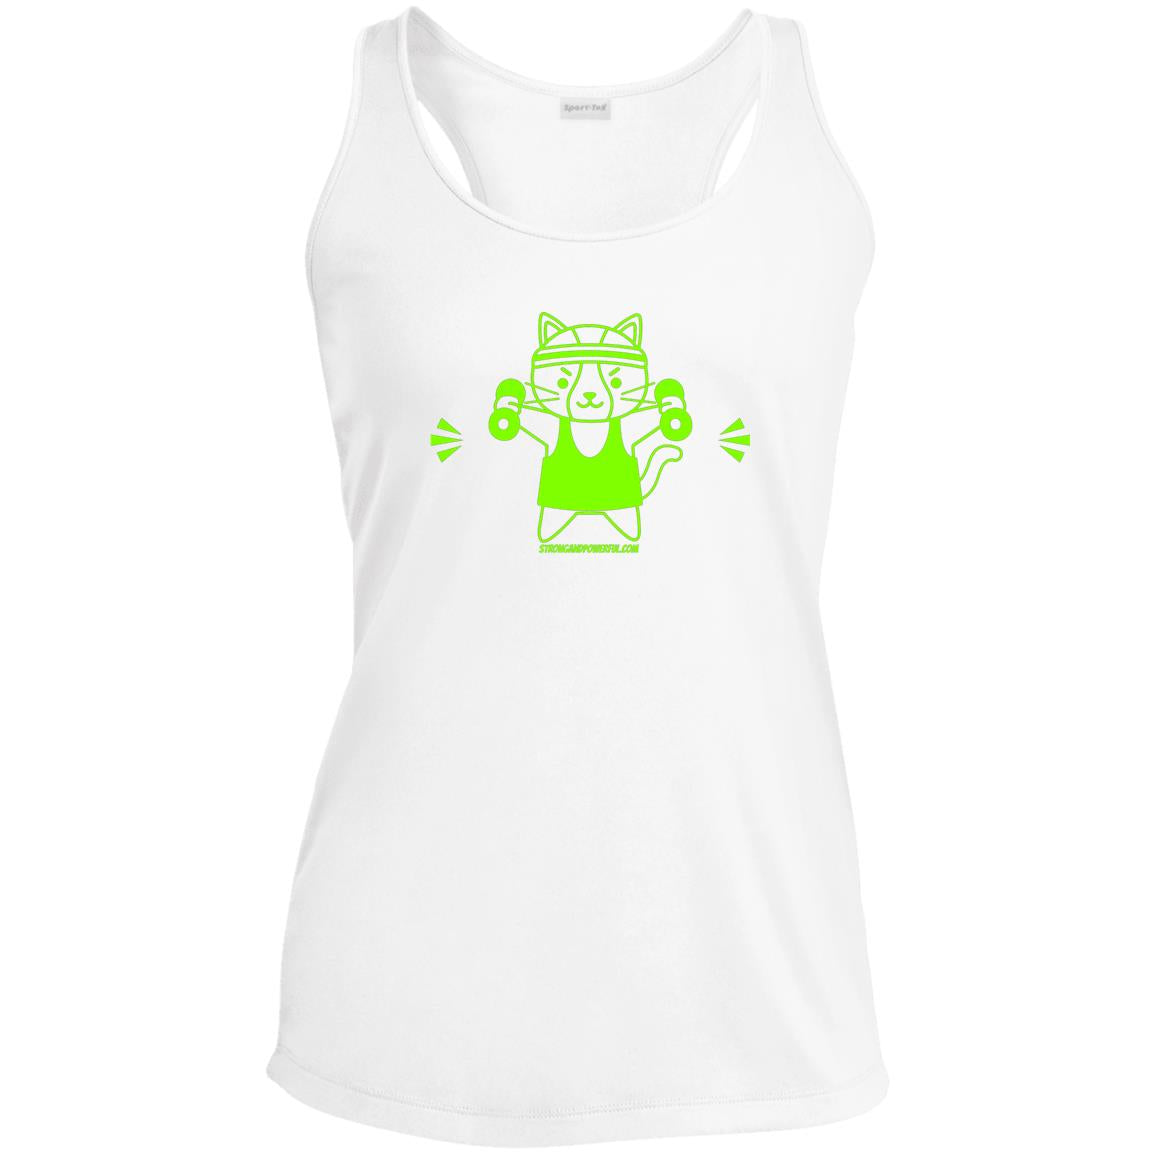 Karma the Kitty Dumbbell Workout Chartreuse Ladies' Performance Racerback Tank Dri-Fit